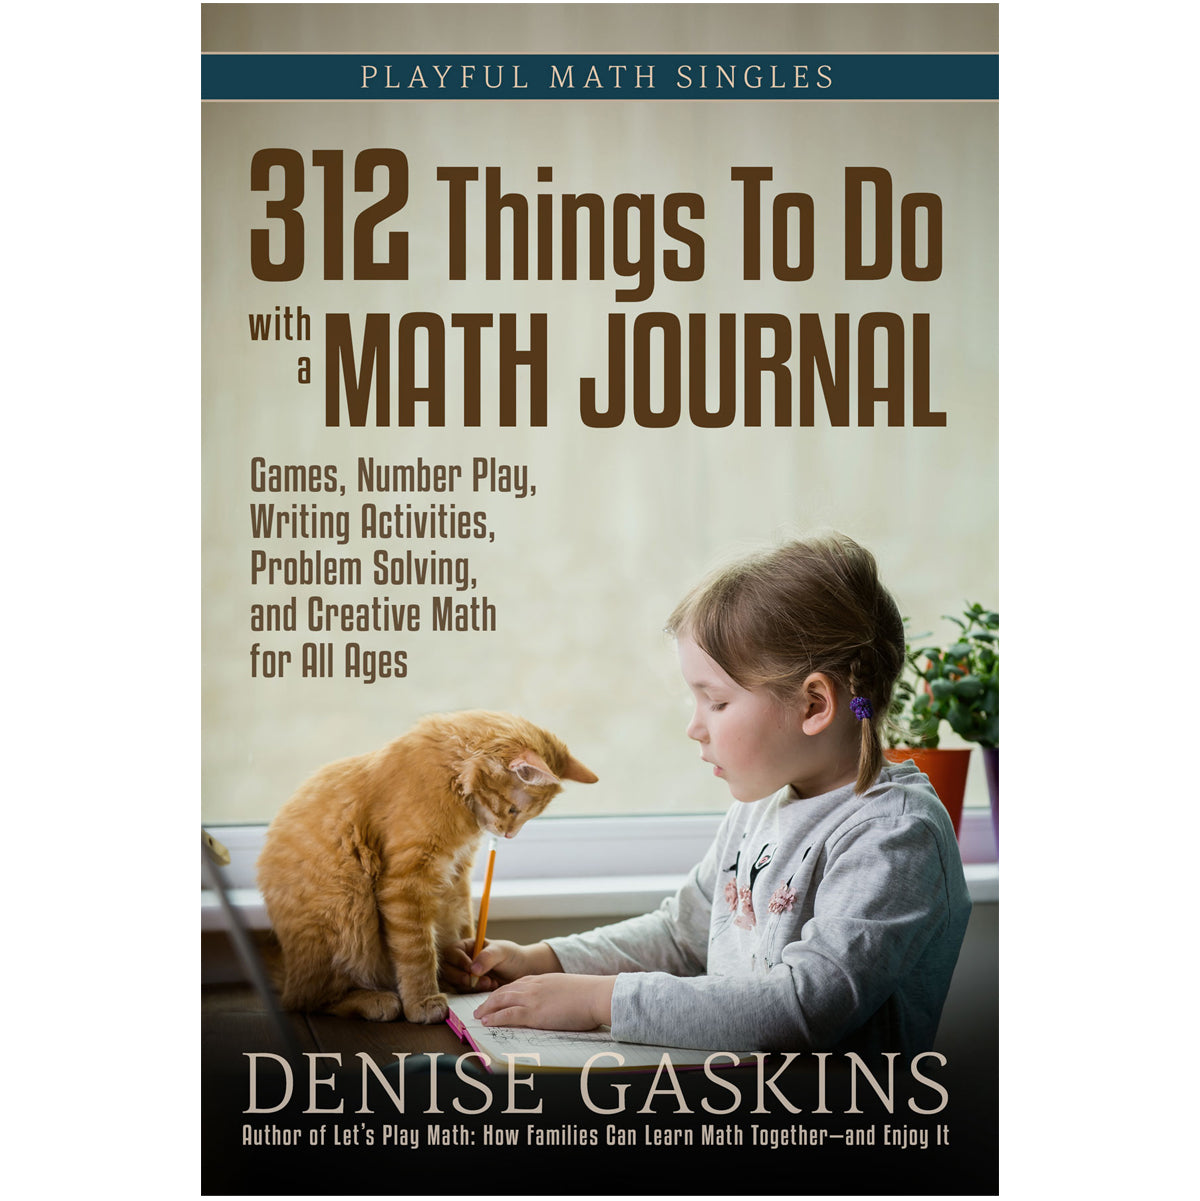 Math journaling games and activities paperback by Denise Gaskins